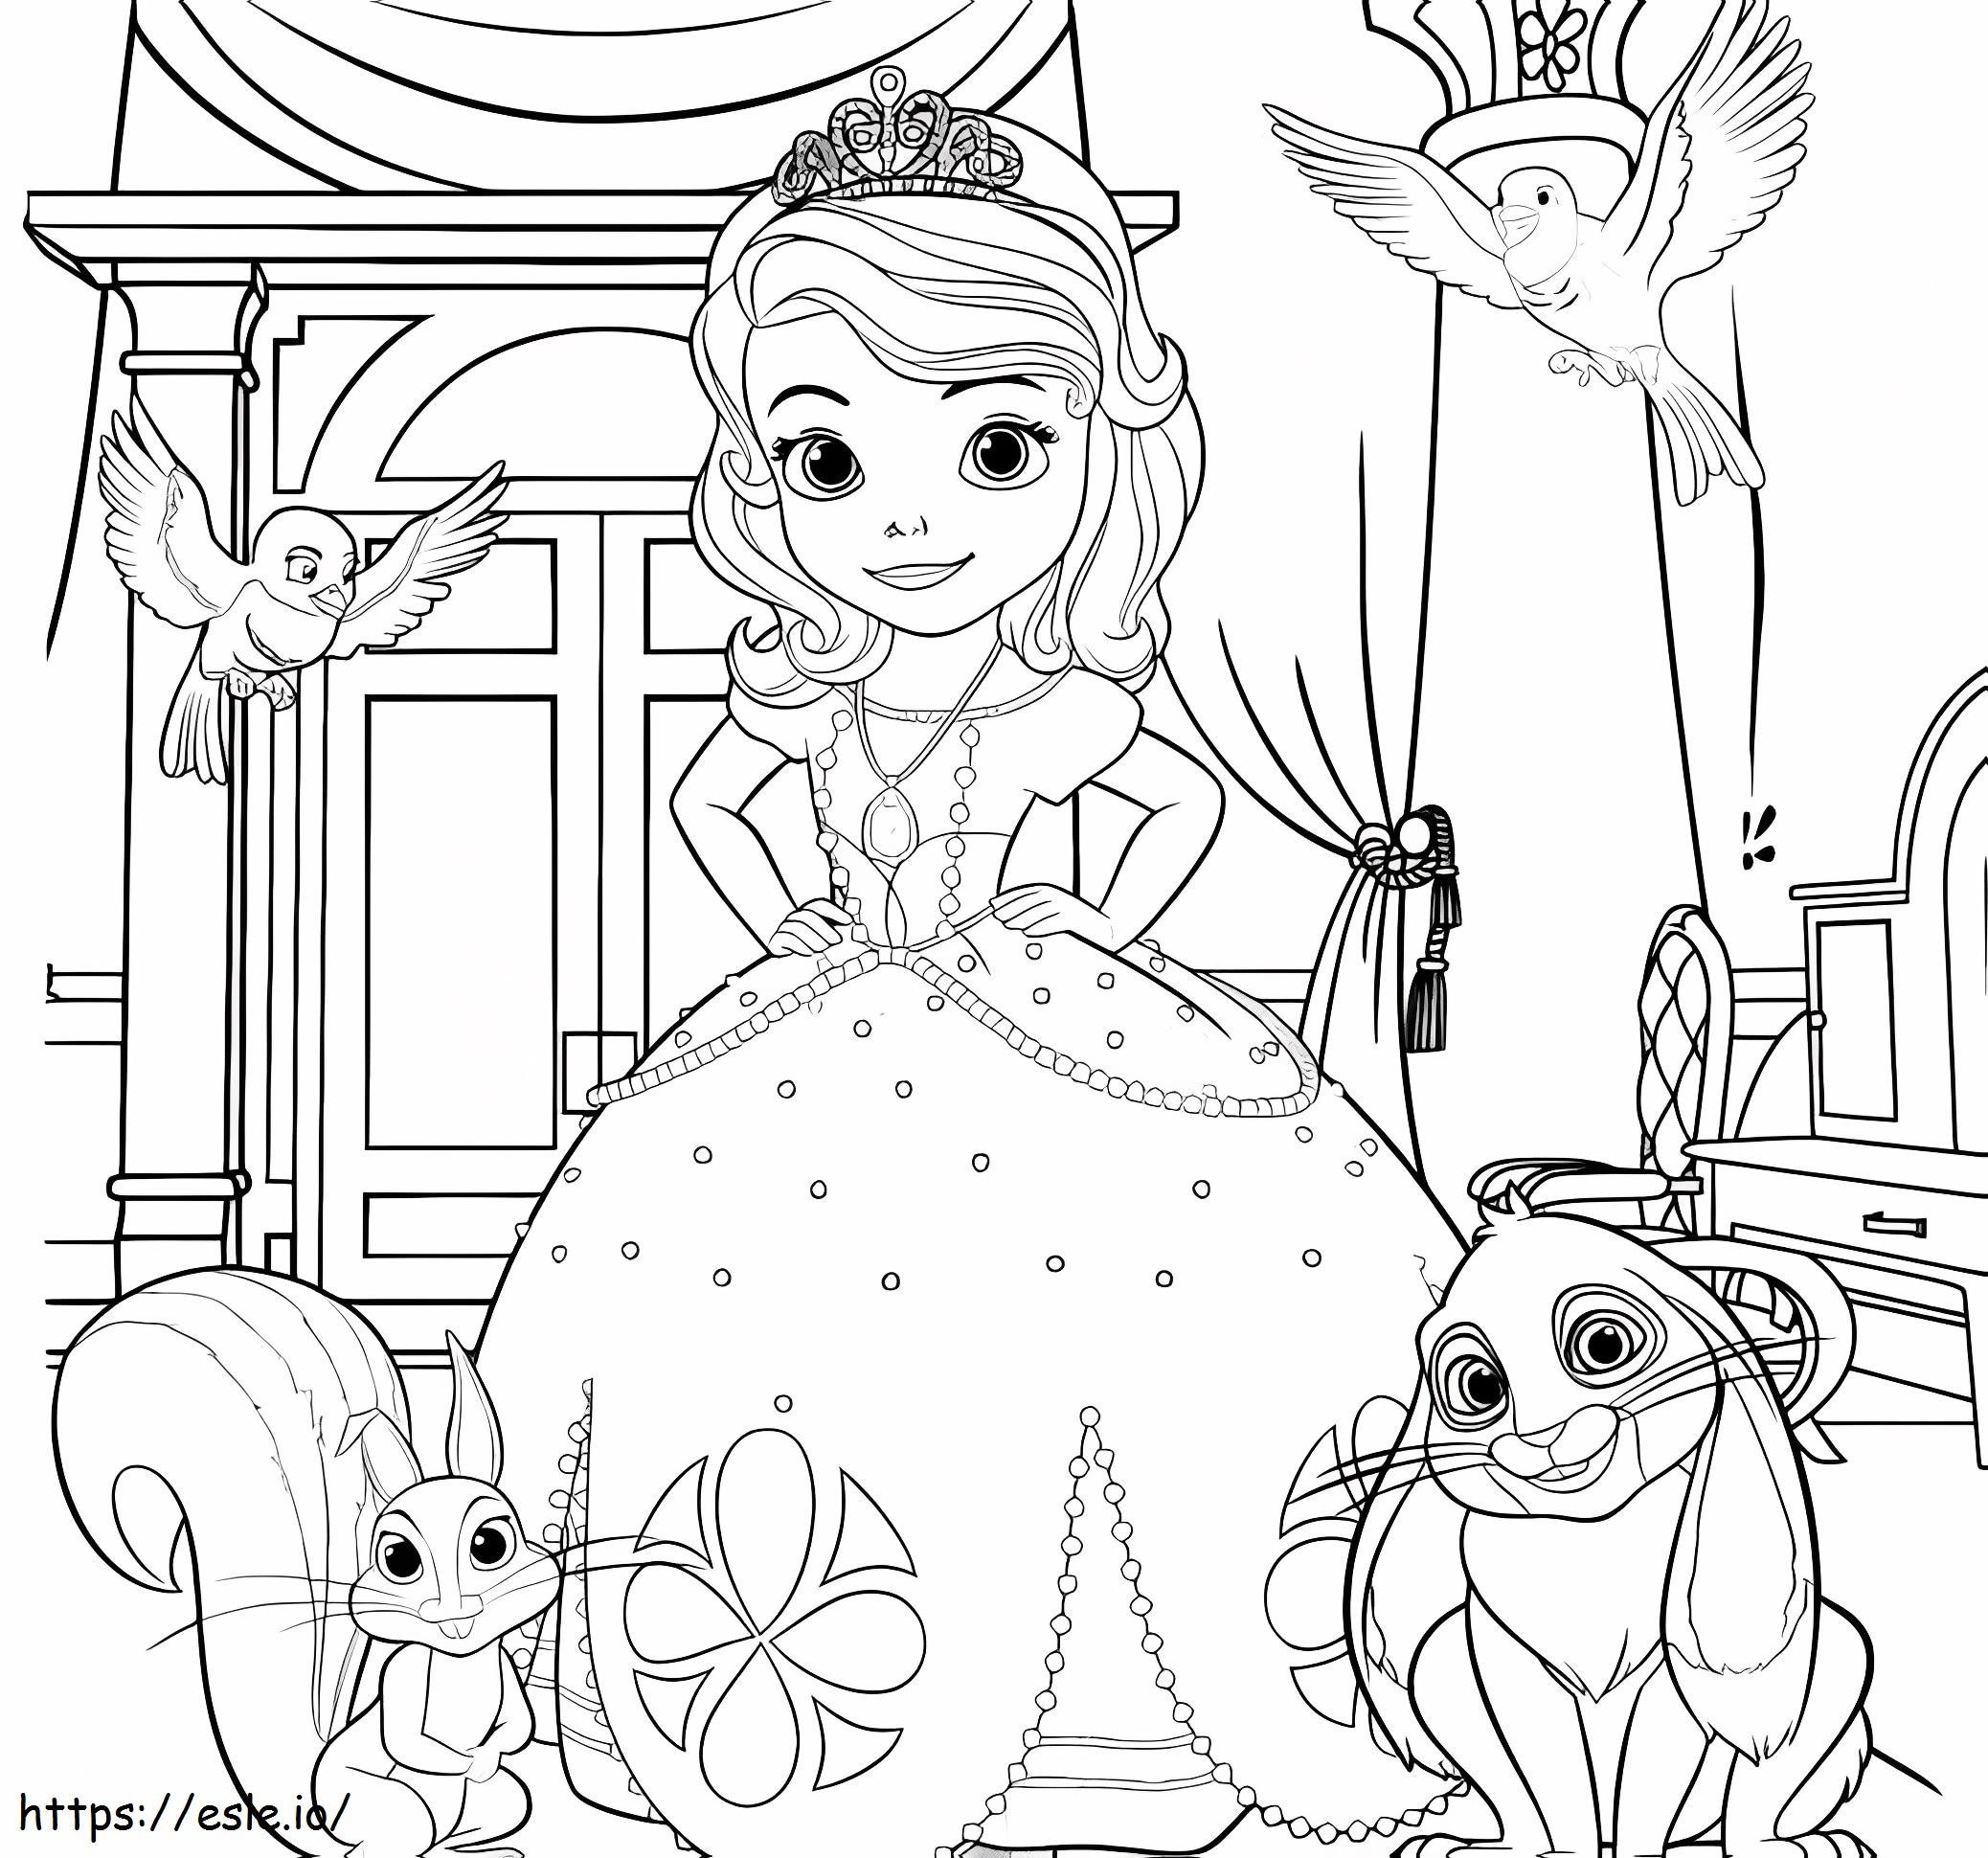 Sofiaaa4 coloring page